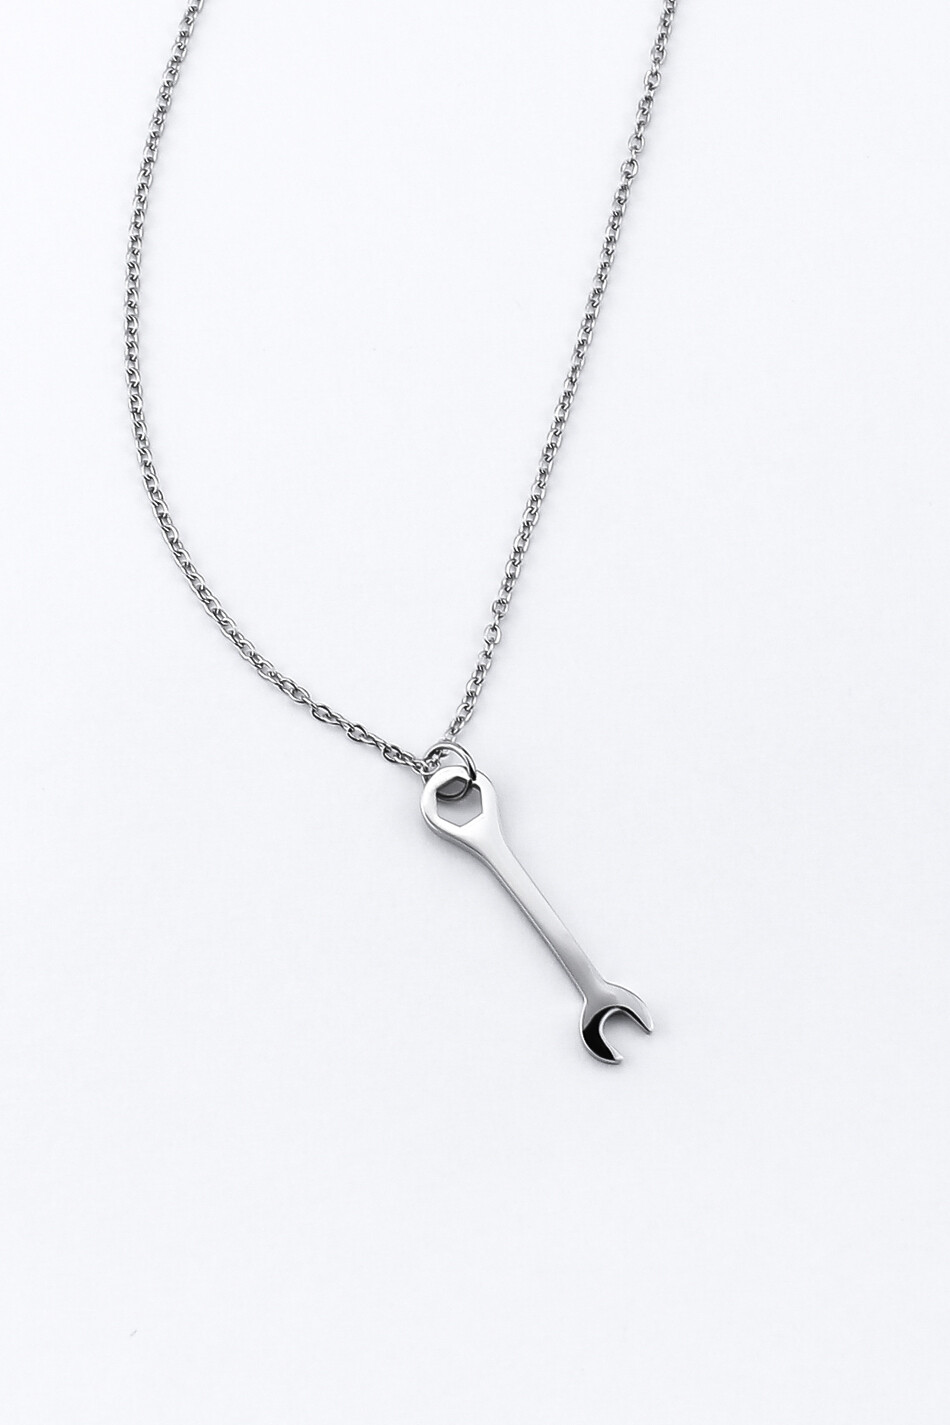 Pendant "Wrench" on a thin chain